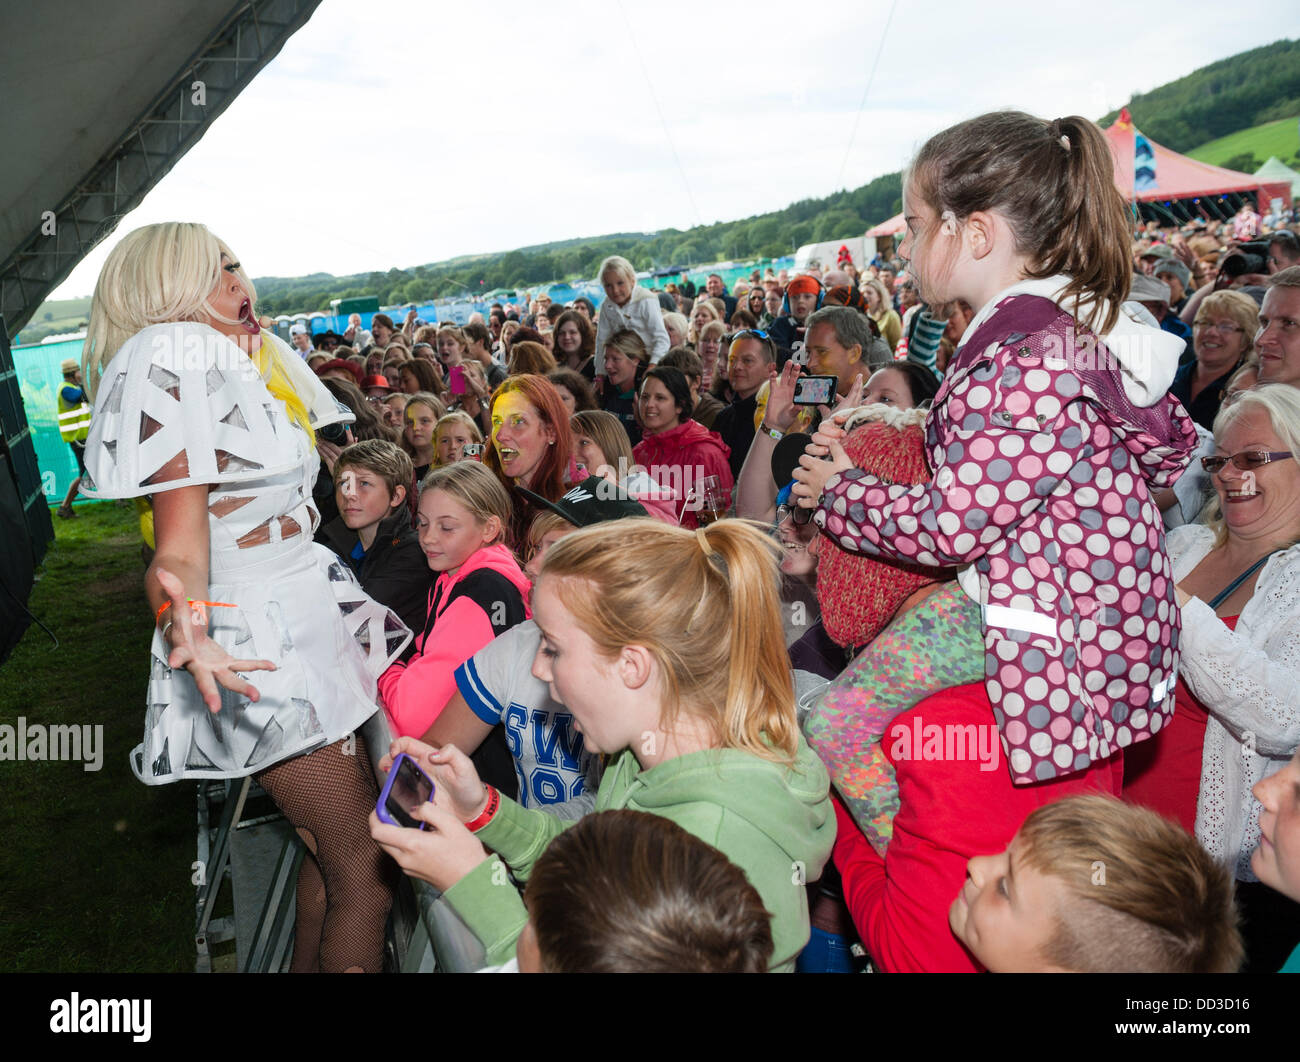 Aberystwyth Wales UK, Saturday 24 August 2013   'Maybe GaGa', a Lady Gaga tribute act, with her fans at The second day of the  2013 Big Tribute Festival, Wales's only music festival devoted to covers bands. August Bank Holiday weekend 2013  photo Credit:  keith  morris/Alamy Live News Stock Photo